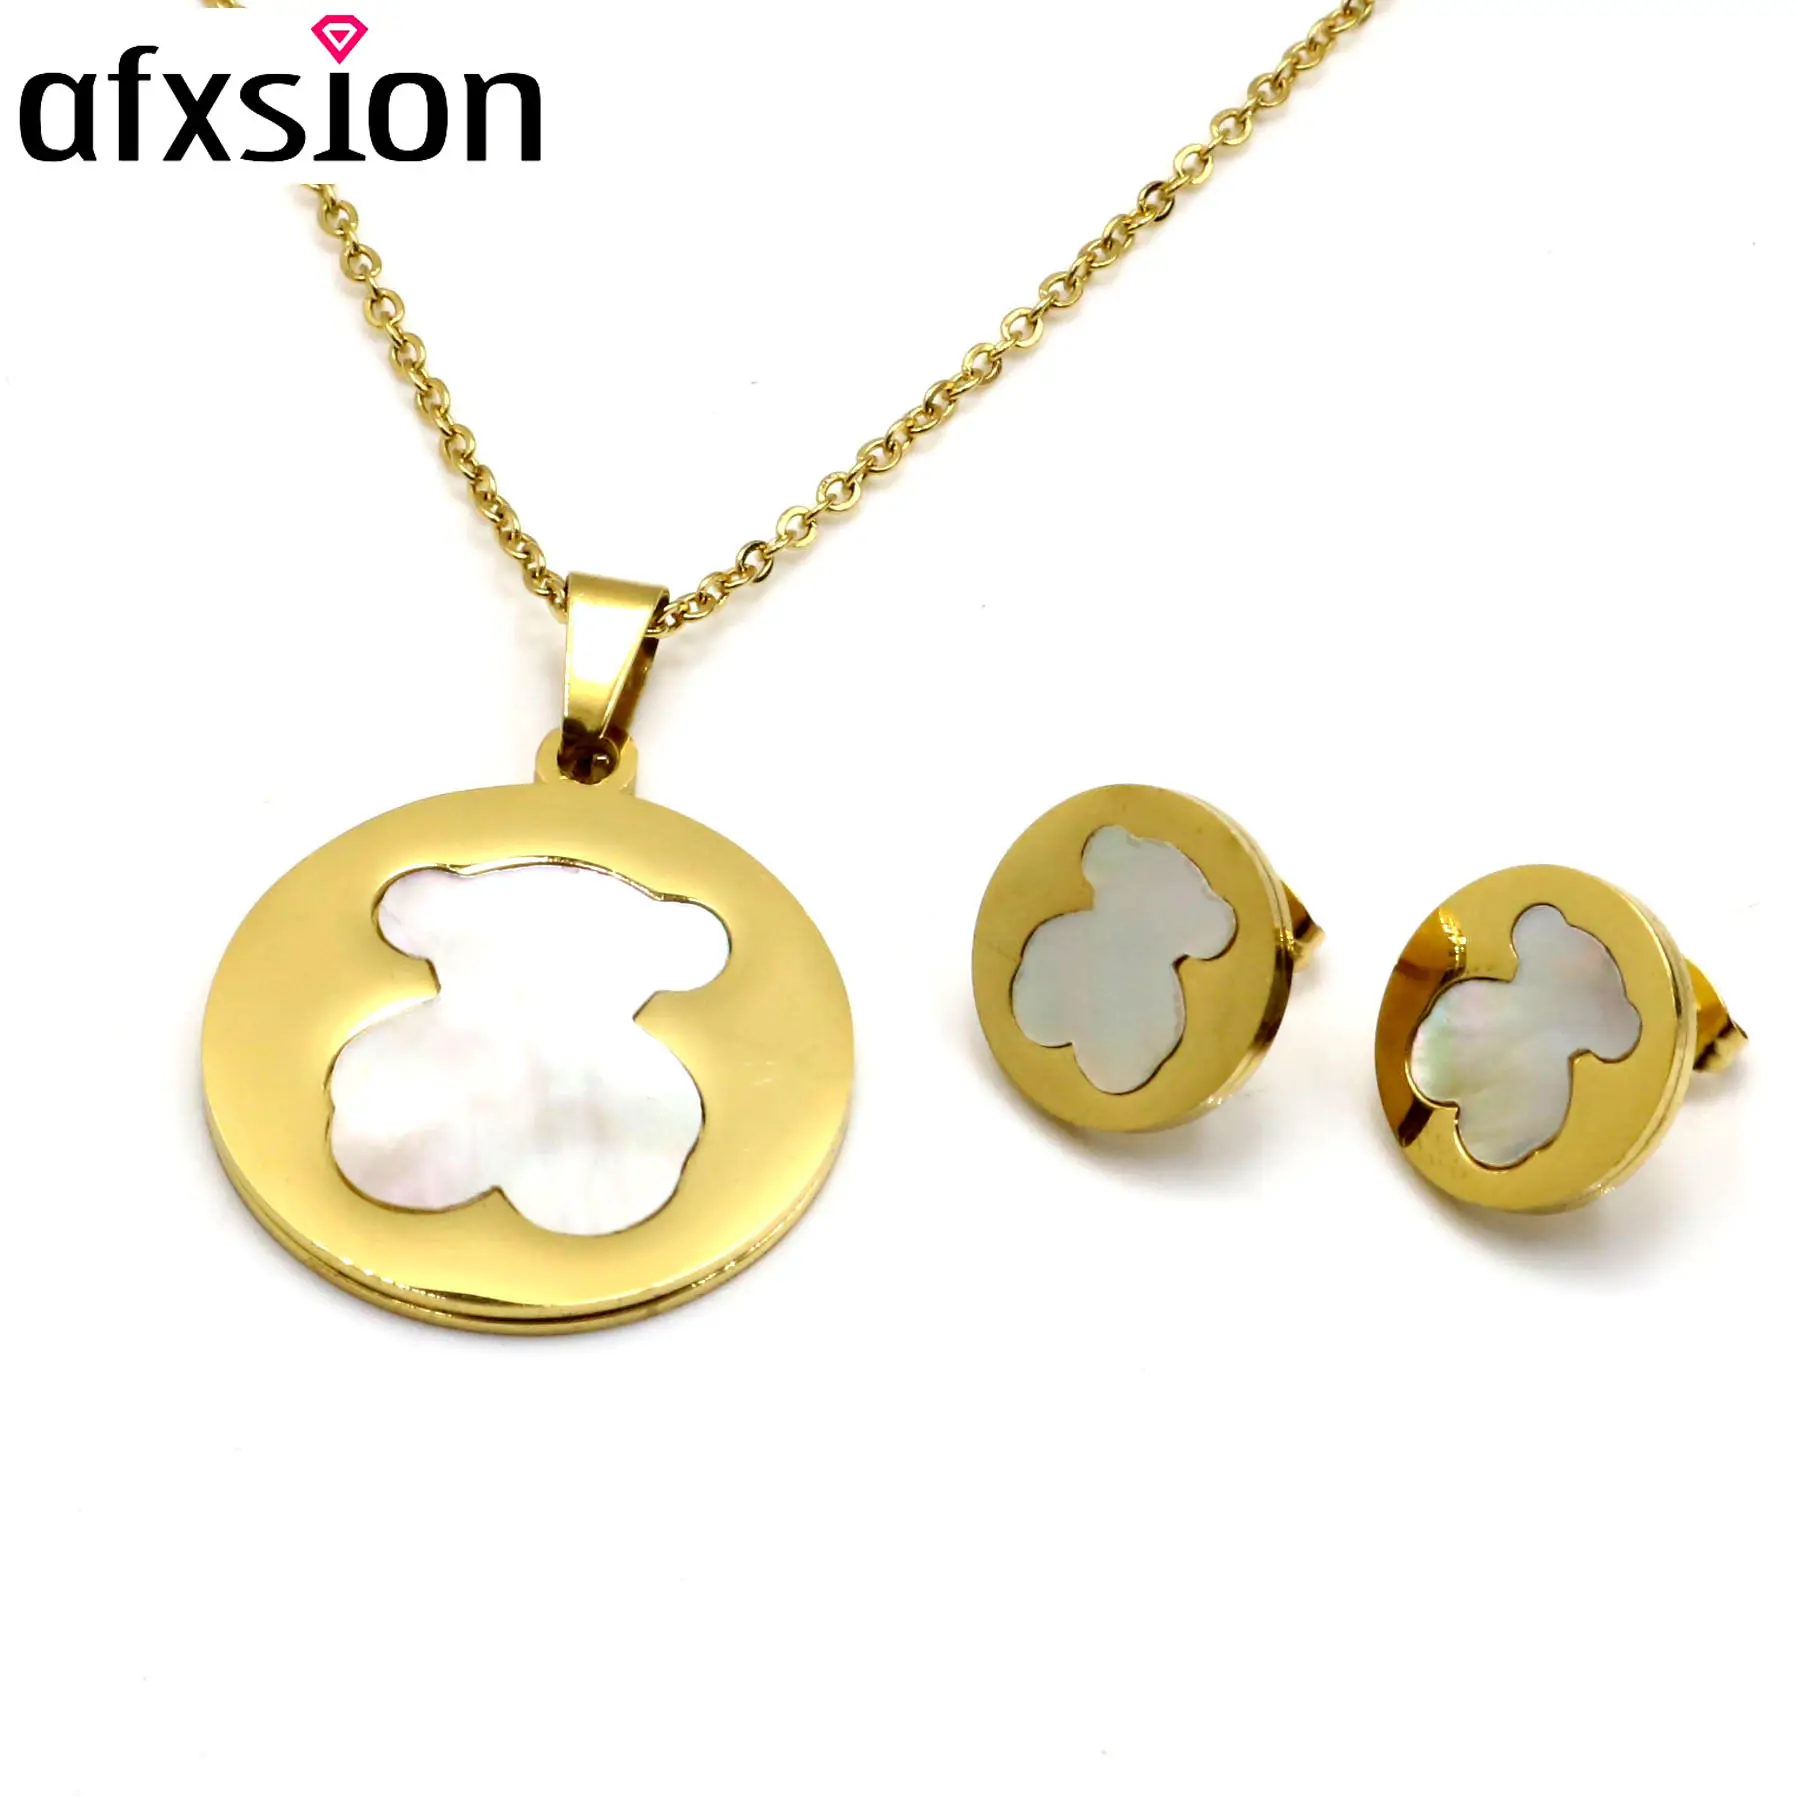 Afxsion fashion shell Bear Pendant necklace and earrings With diamond Stainless steel jewelry set women